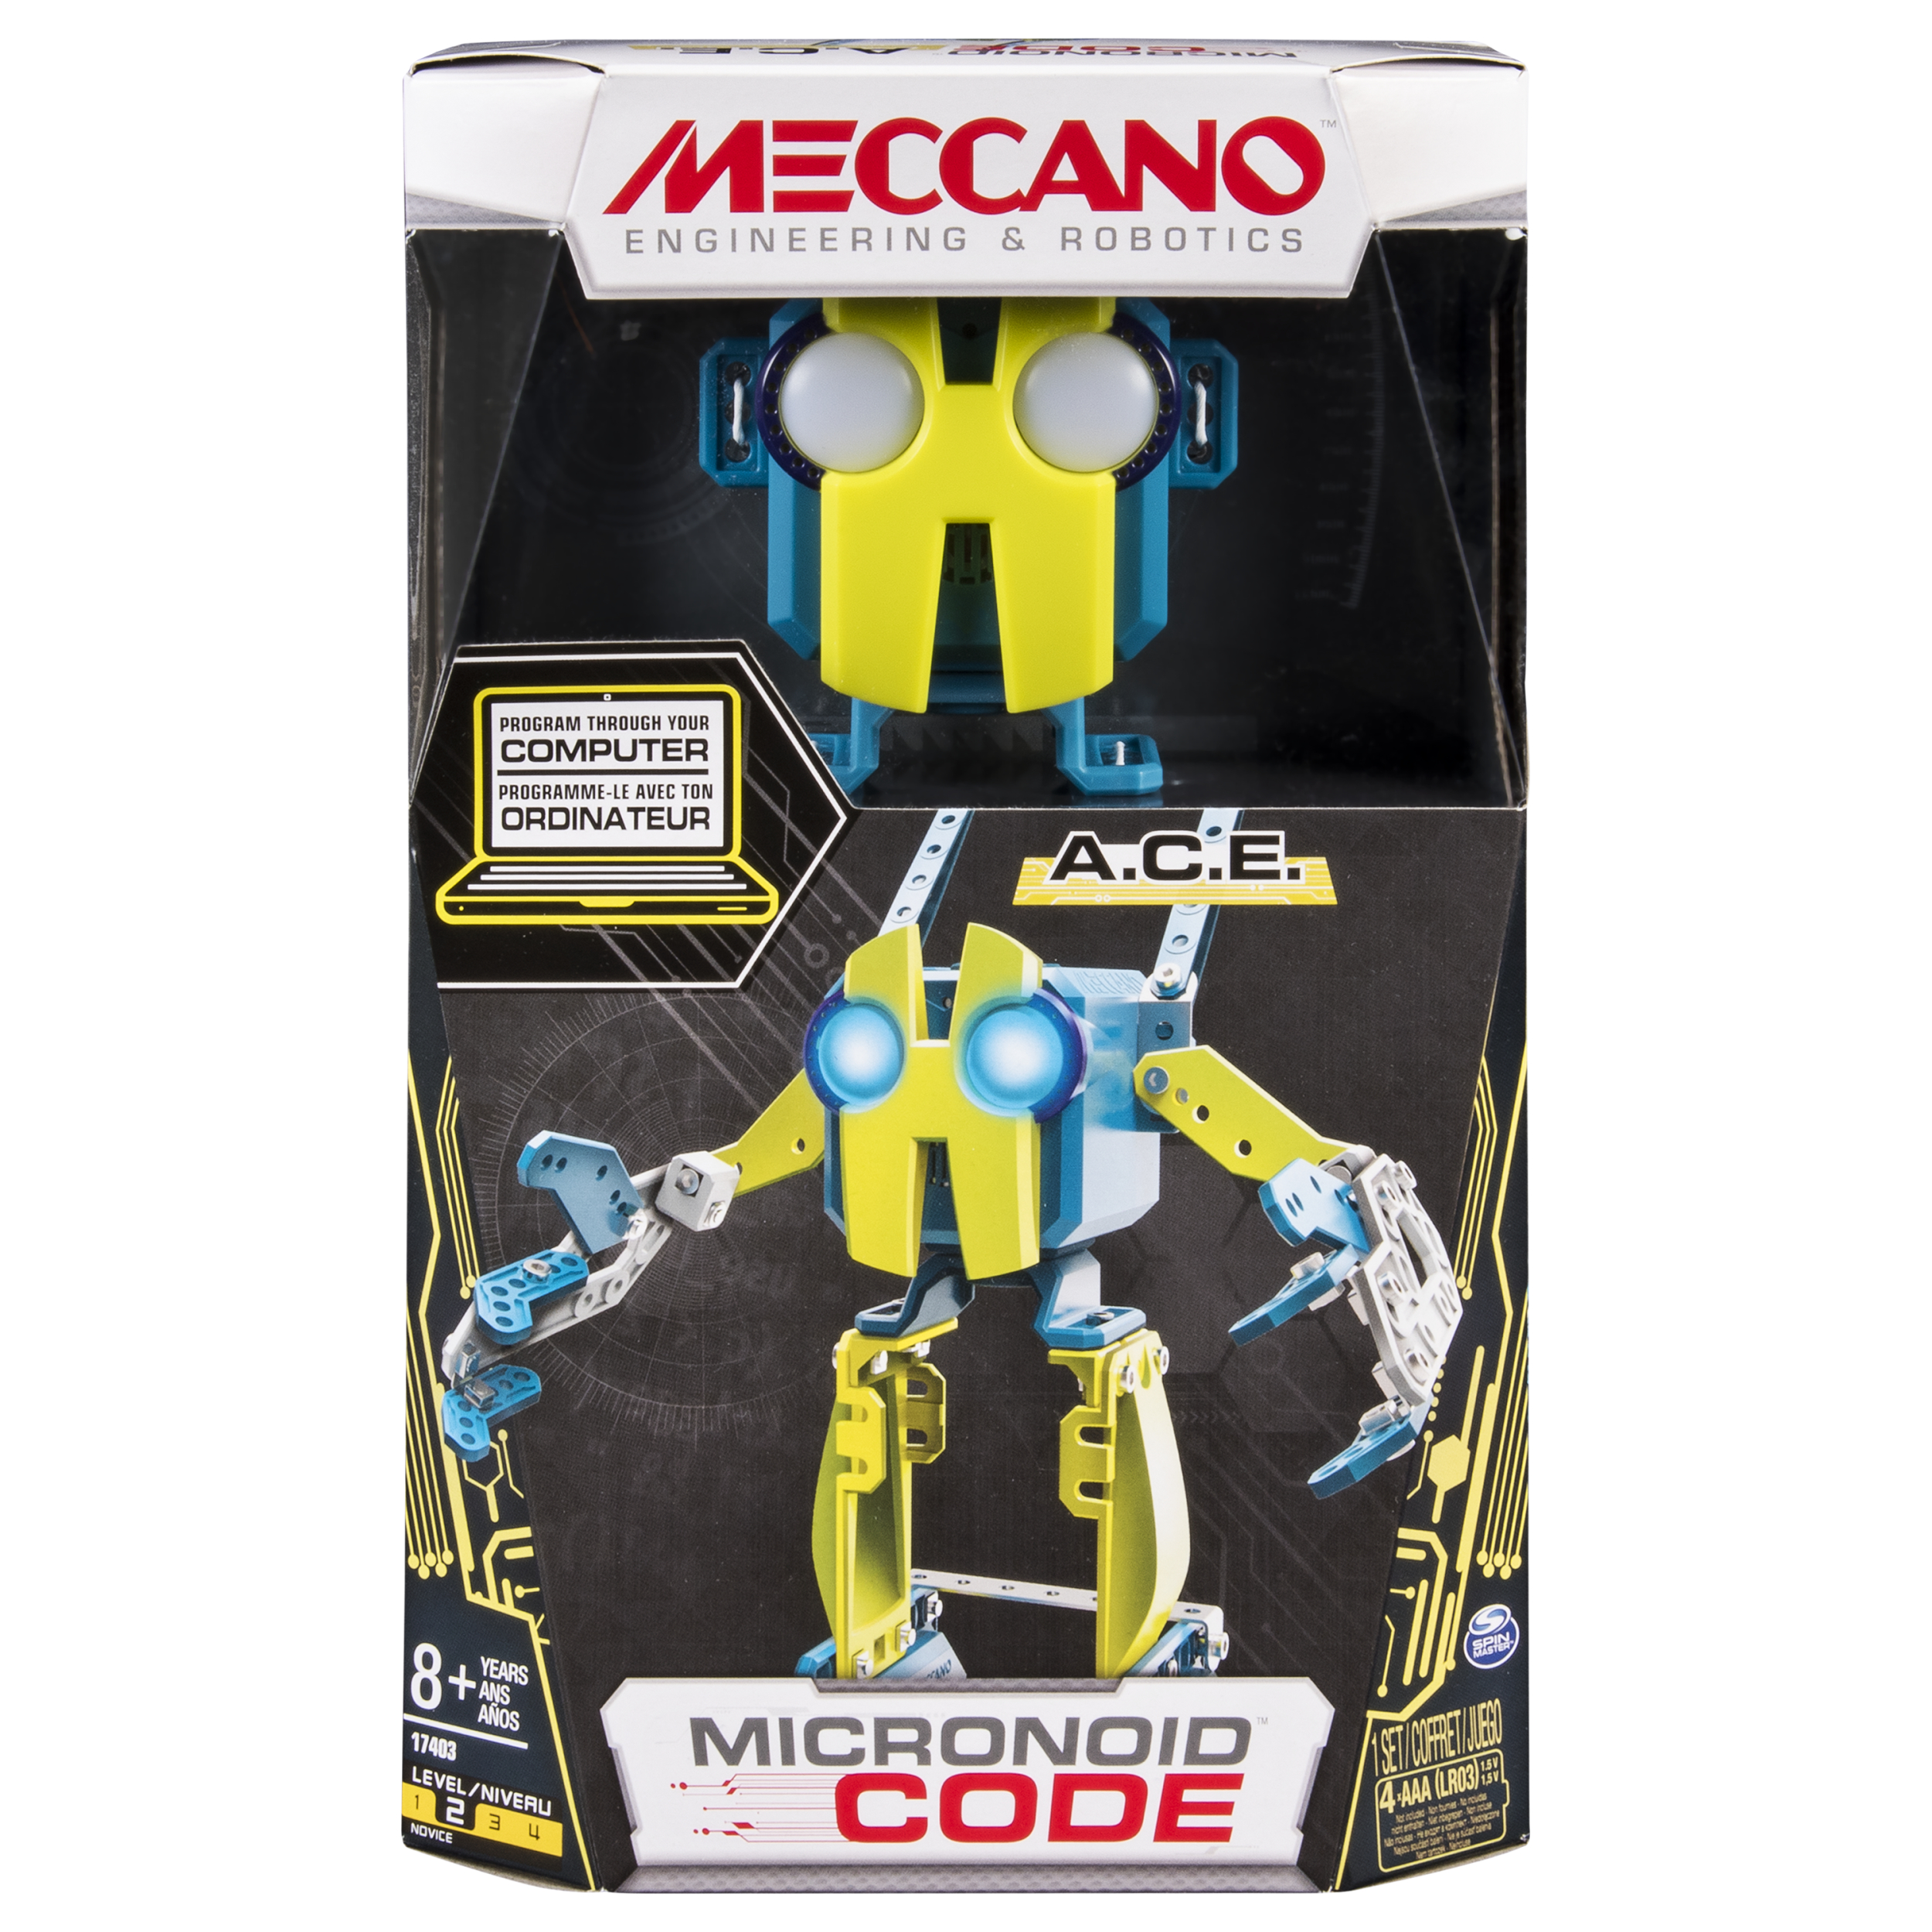 Meccano by Erector, Micronoid Code Programmable Robot Building Kit 